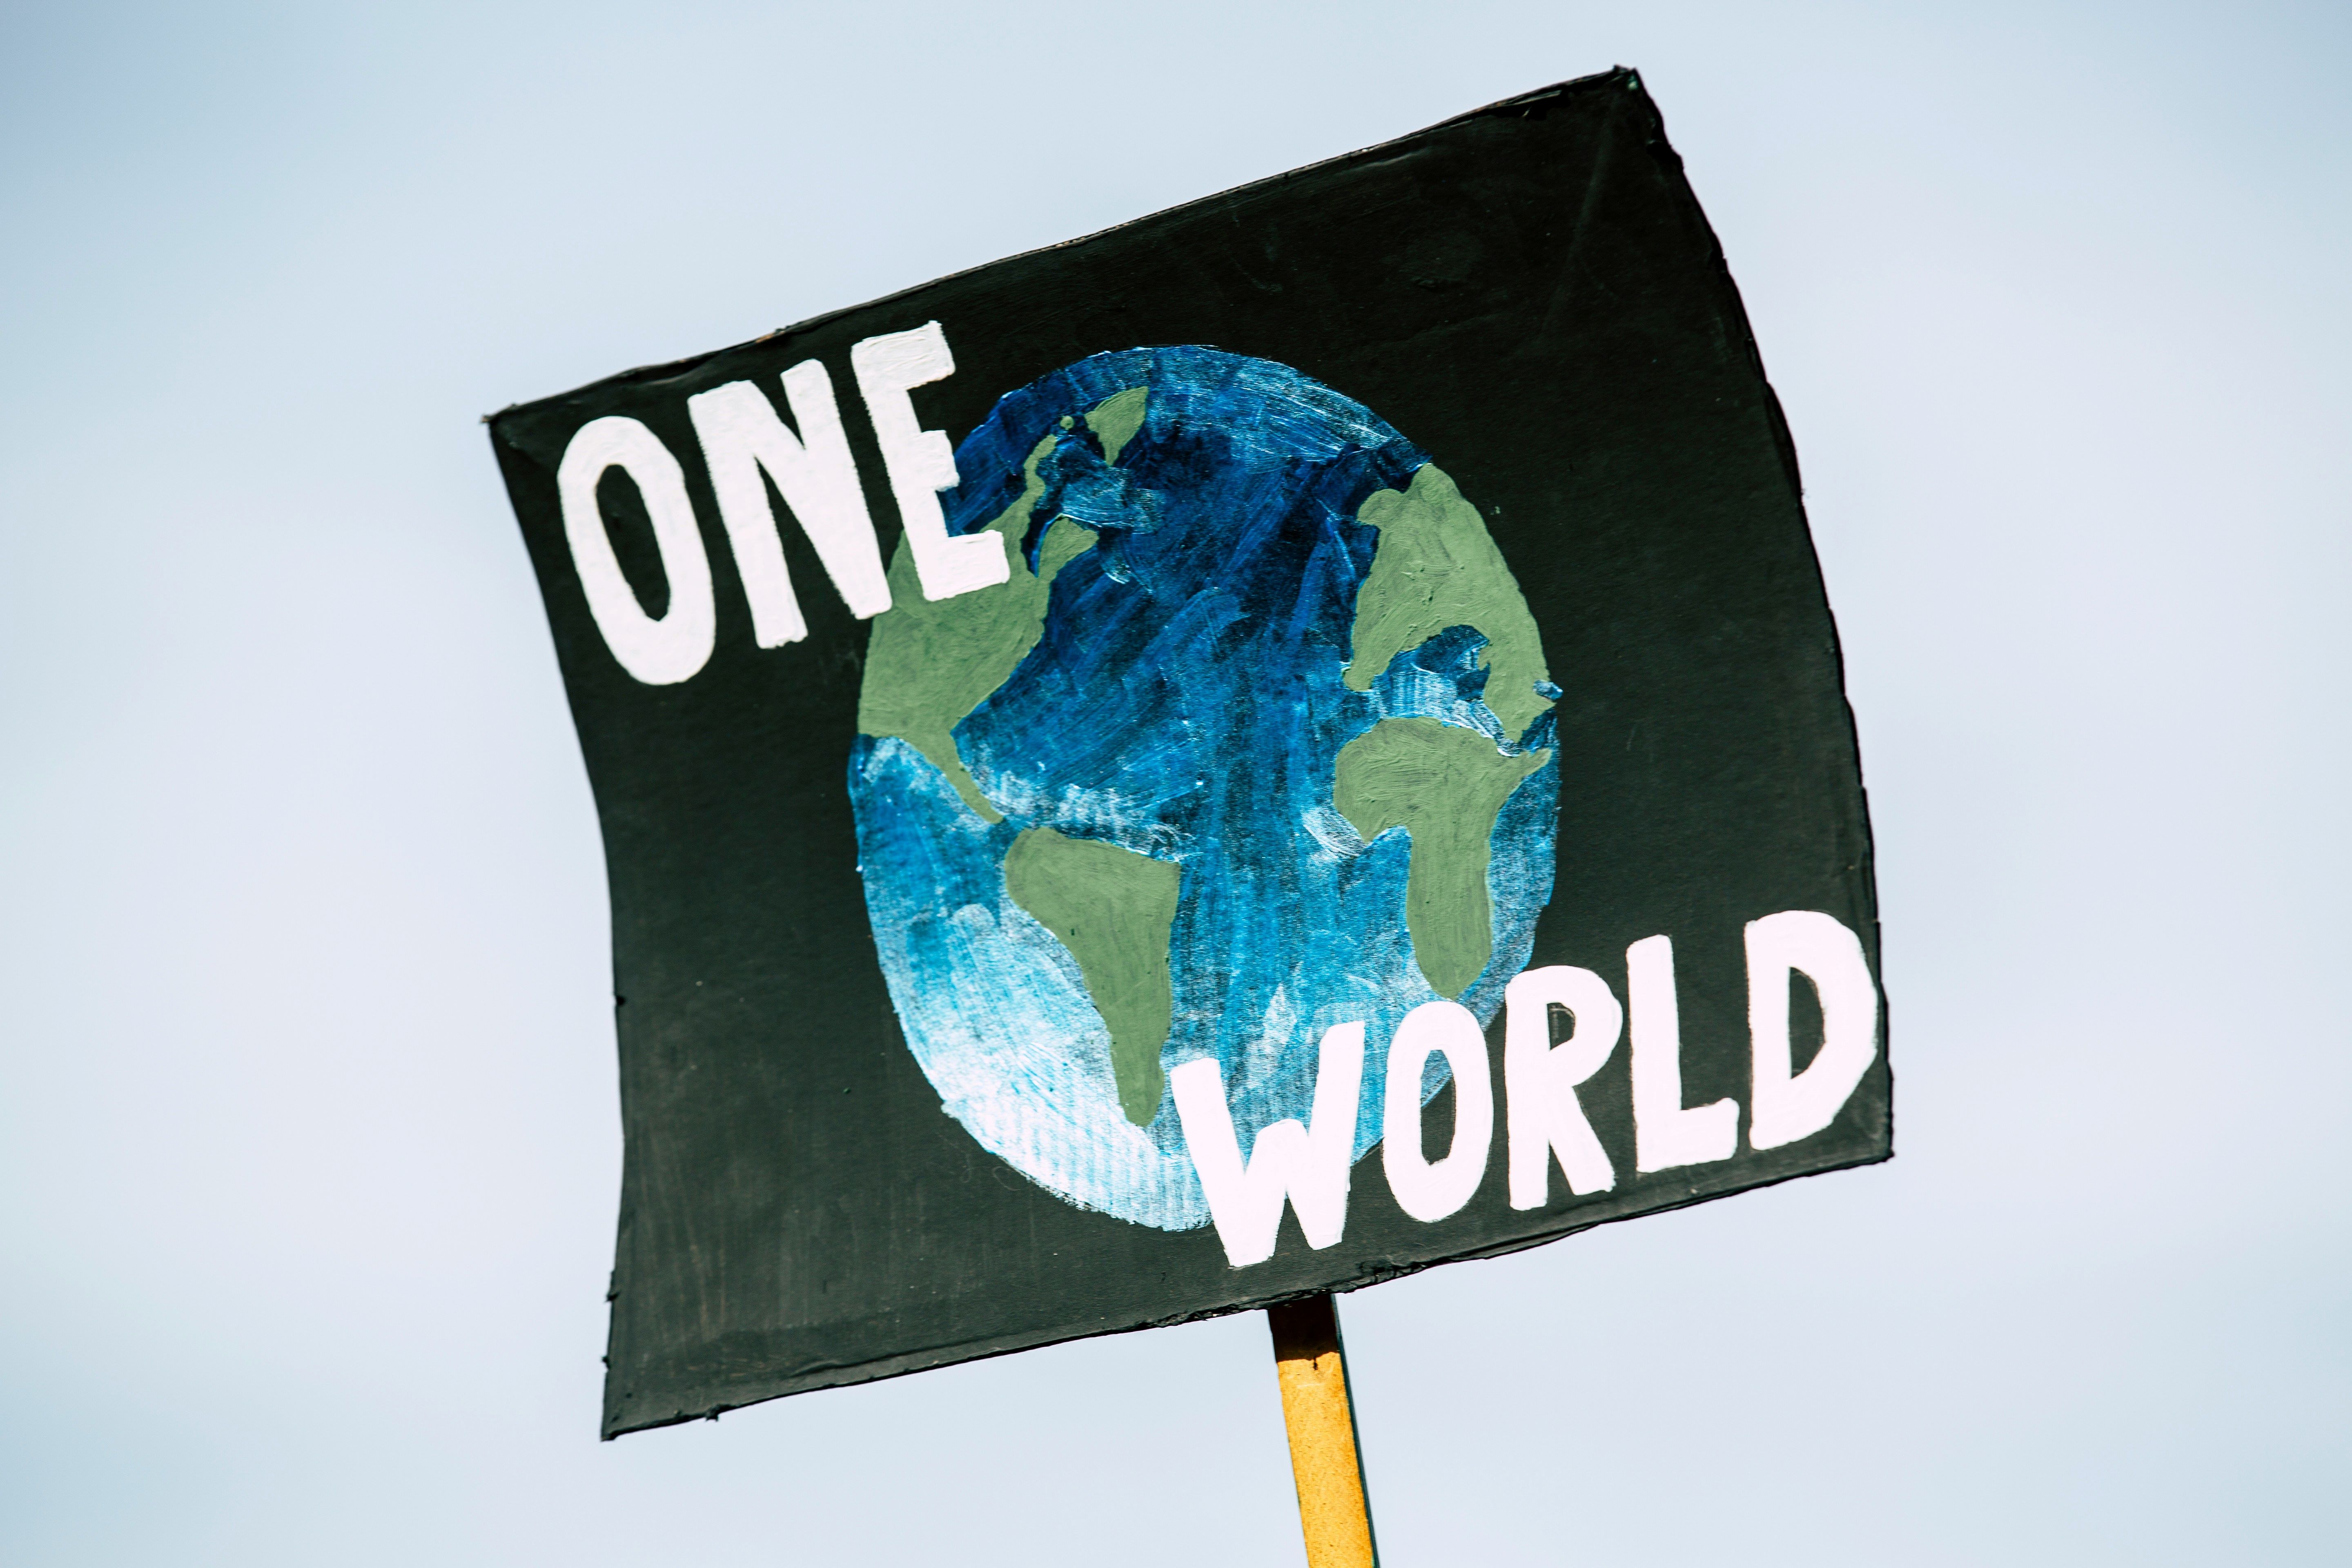 A placard at a climate protest reading 'One World', demanding social and economic justice alongside environmental justice.